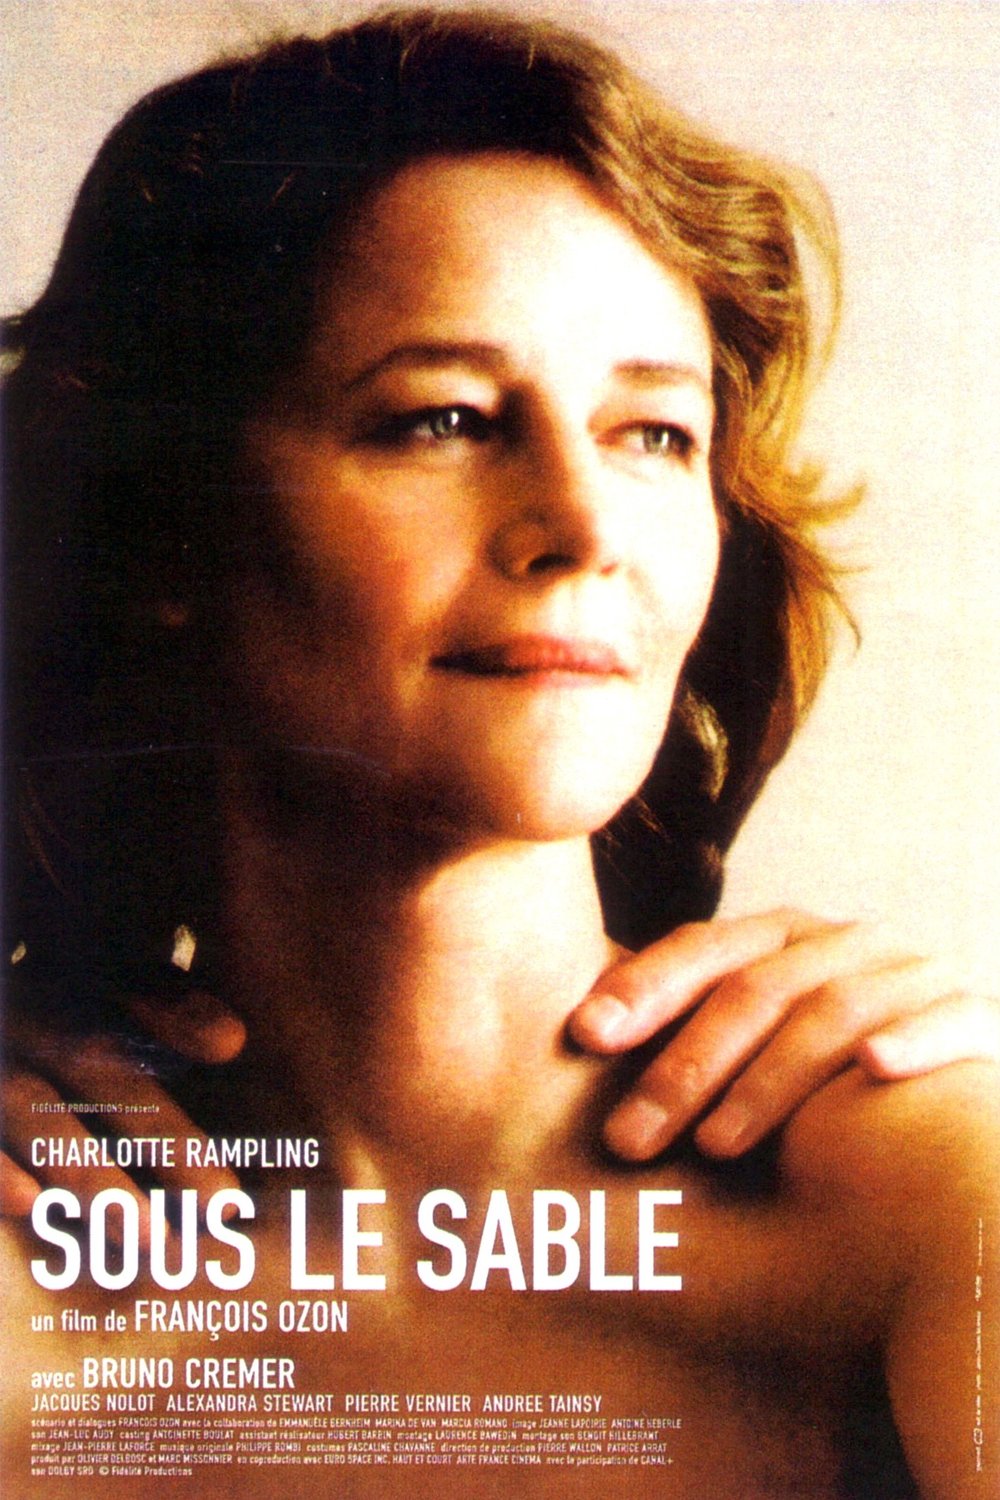 Poster of the movie Sous le sable